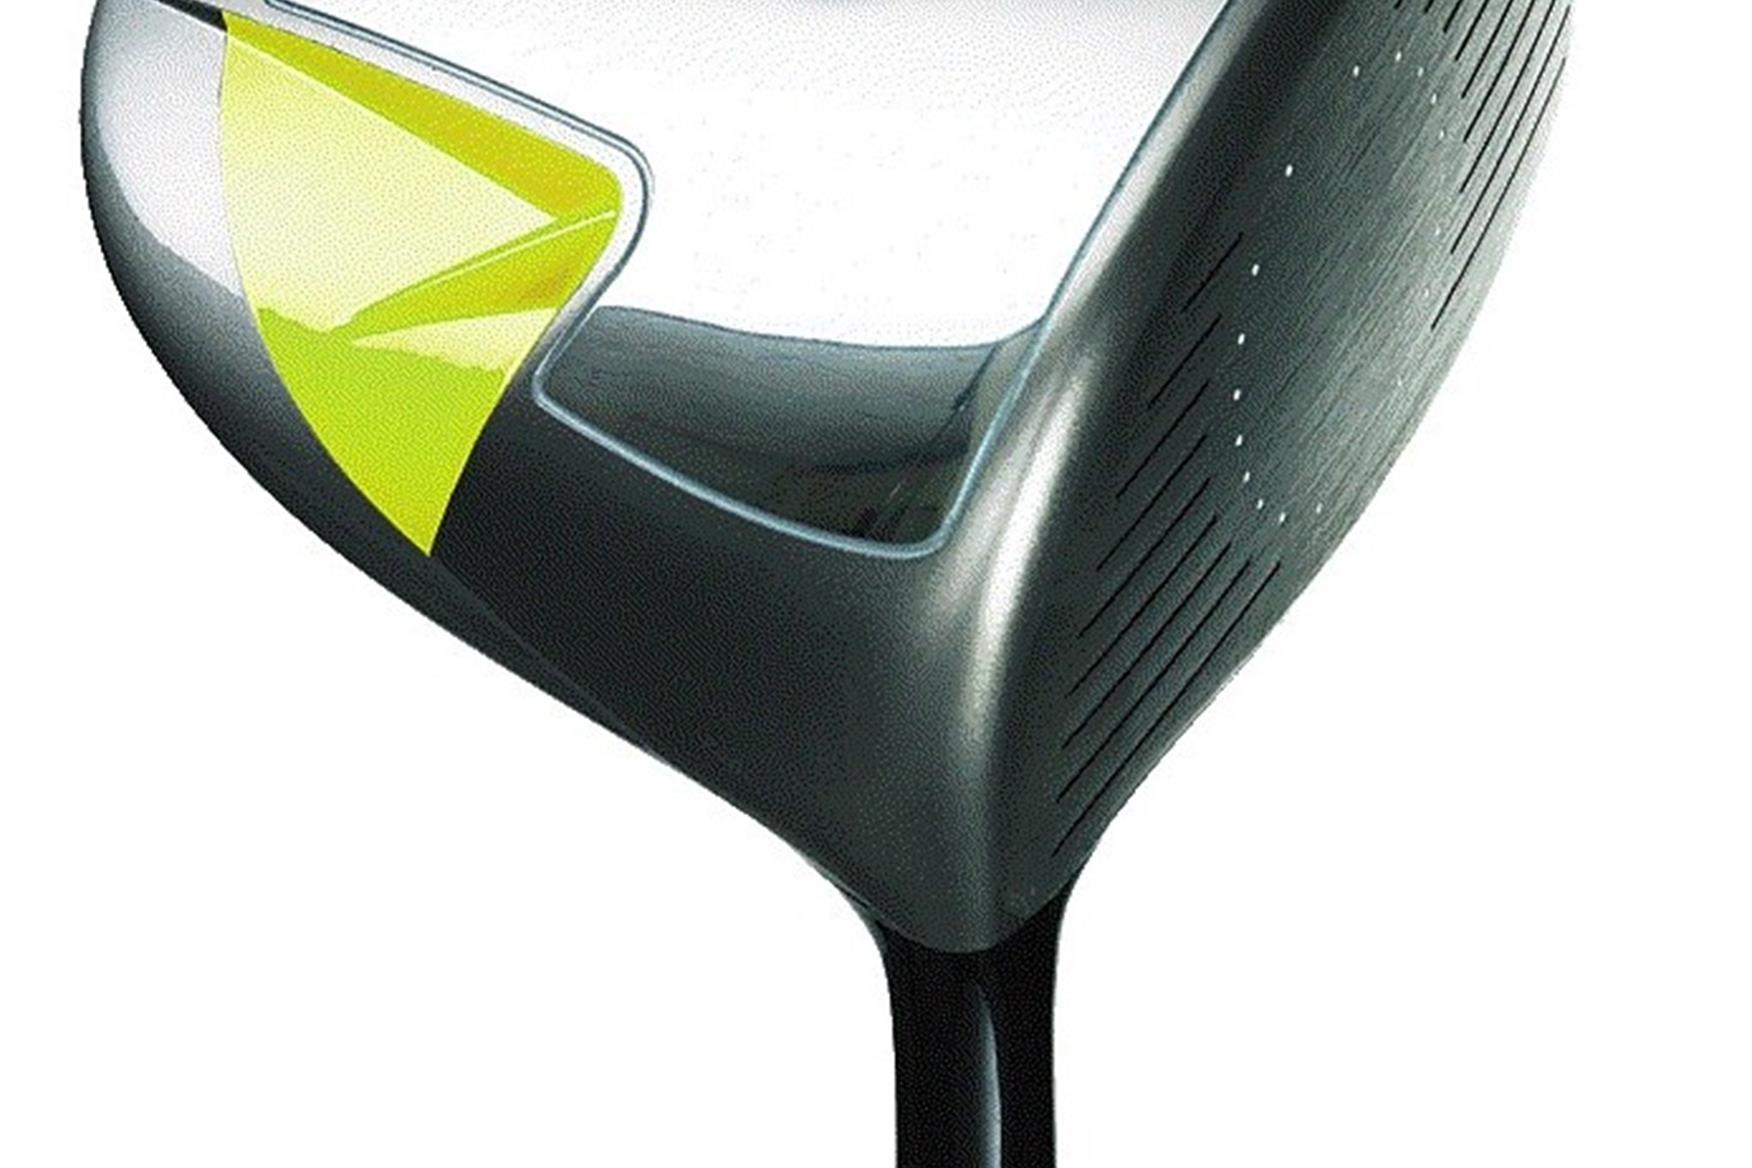 Nike Golf SQ Sumo Driver Review 